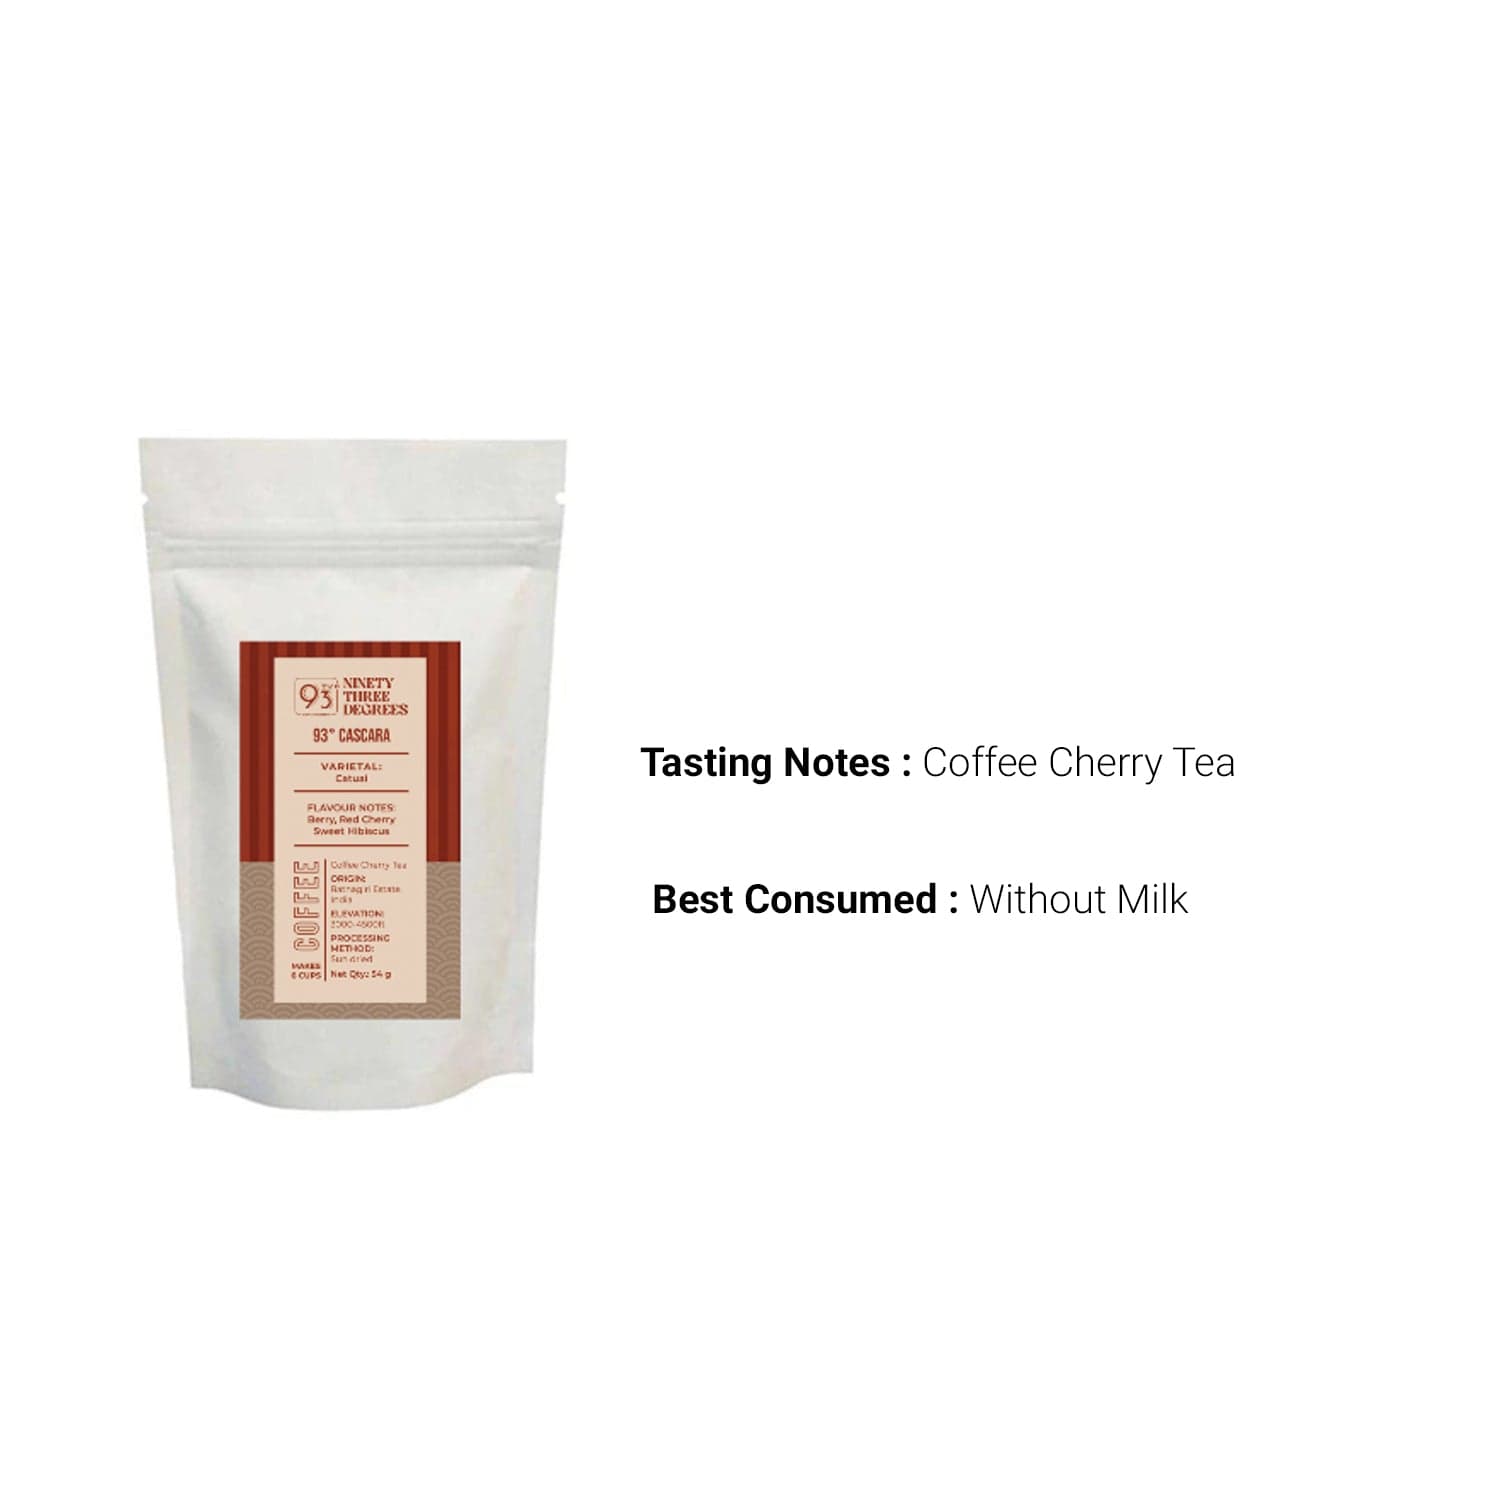 93 degree coffee Ground And Whole Beans 54gms Cascara(Coffee Cherry Tea)